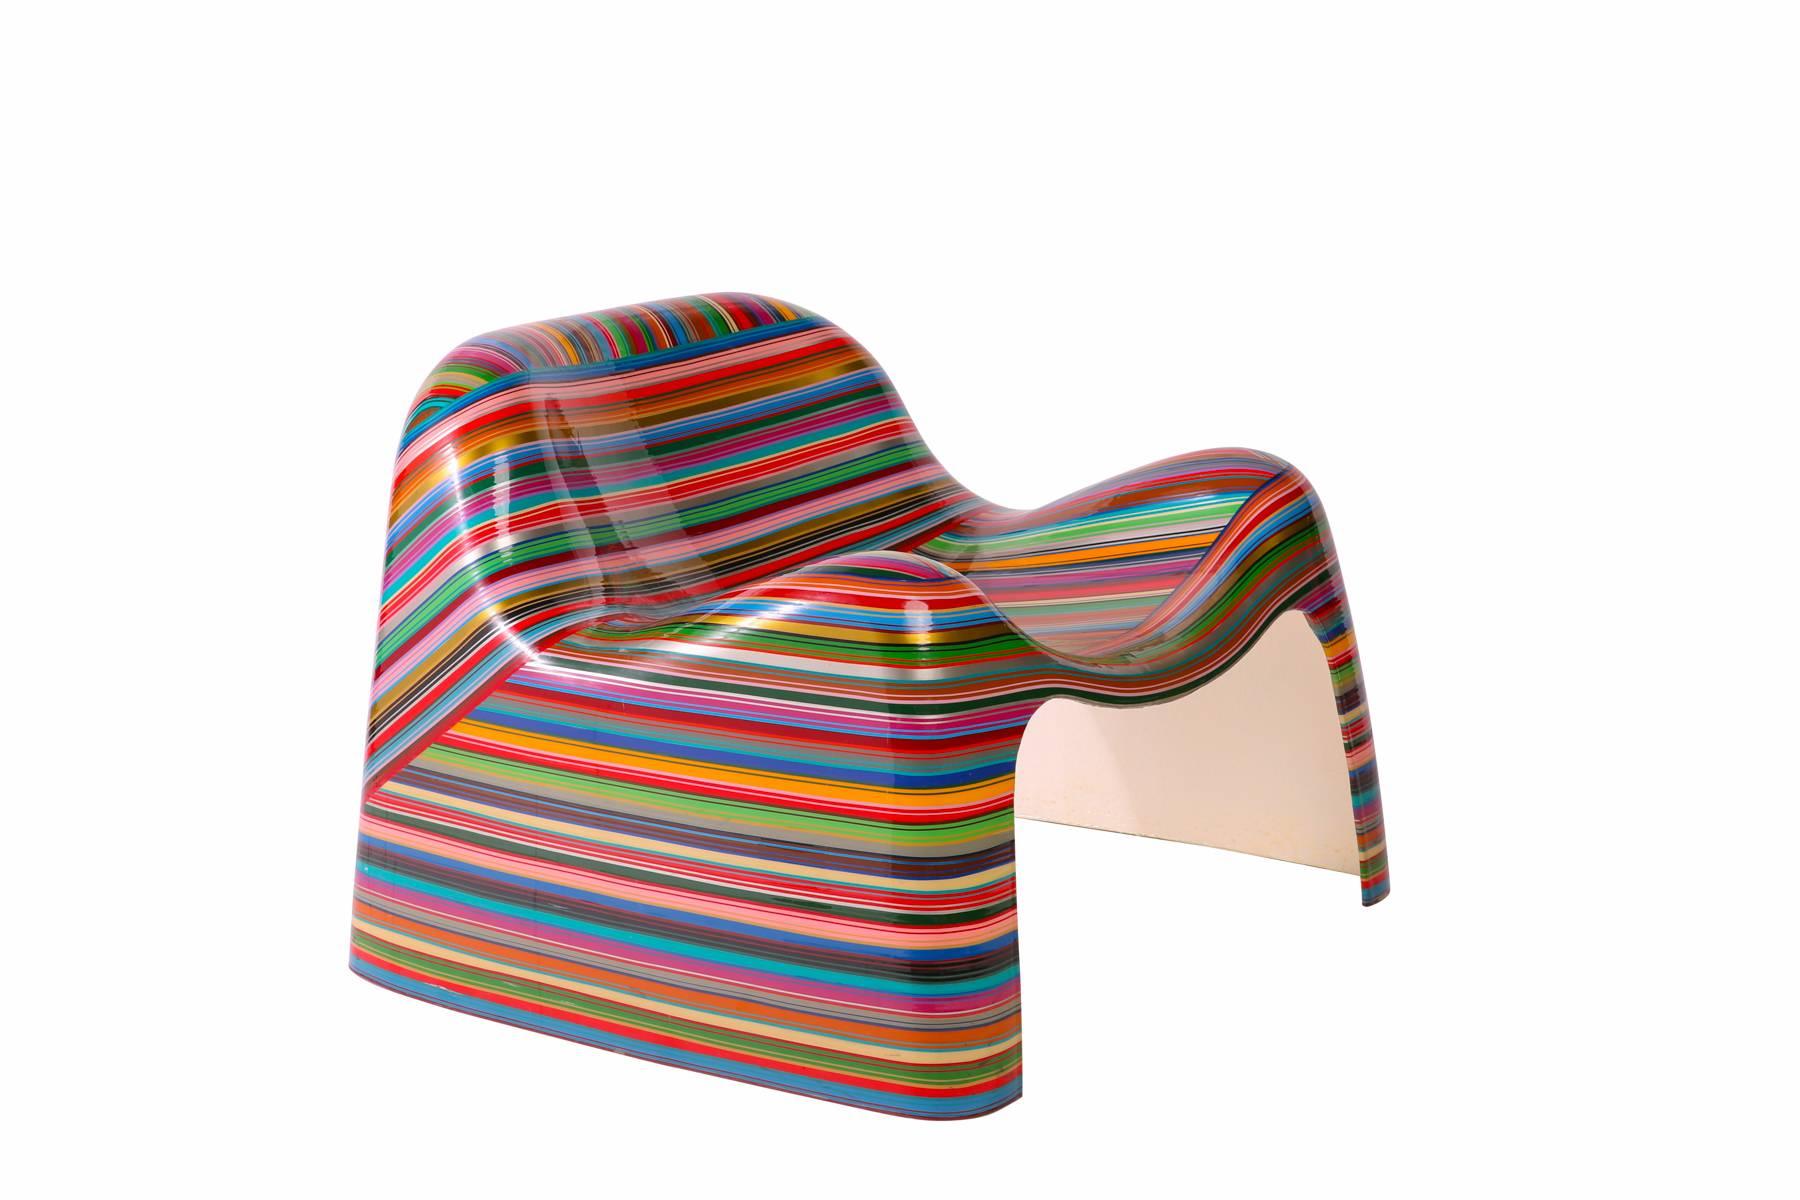 American Mauro Oliveira 'Hard Candy' Pin Striped Lounge Chair